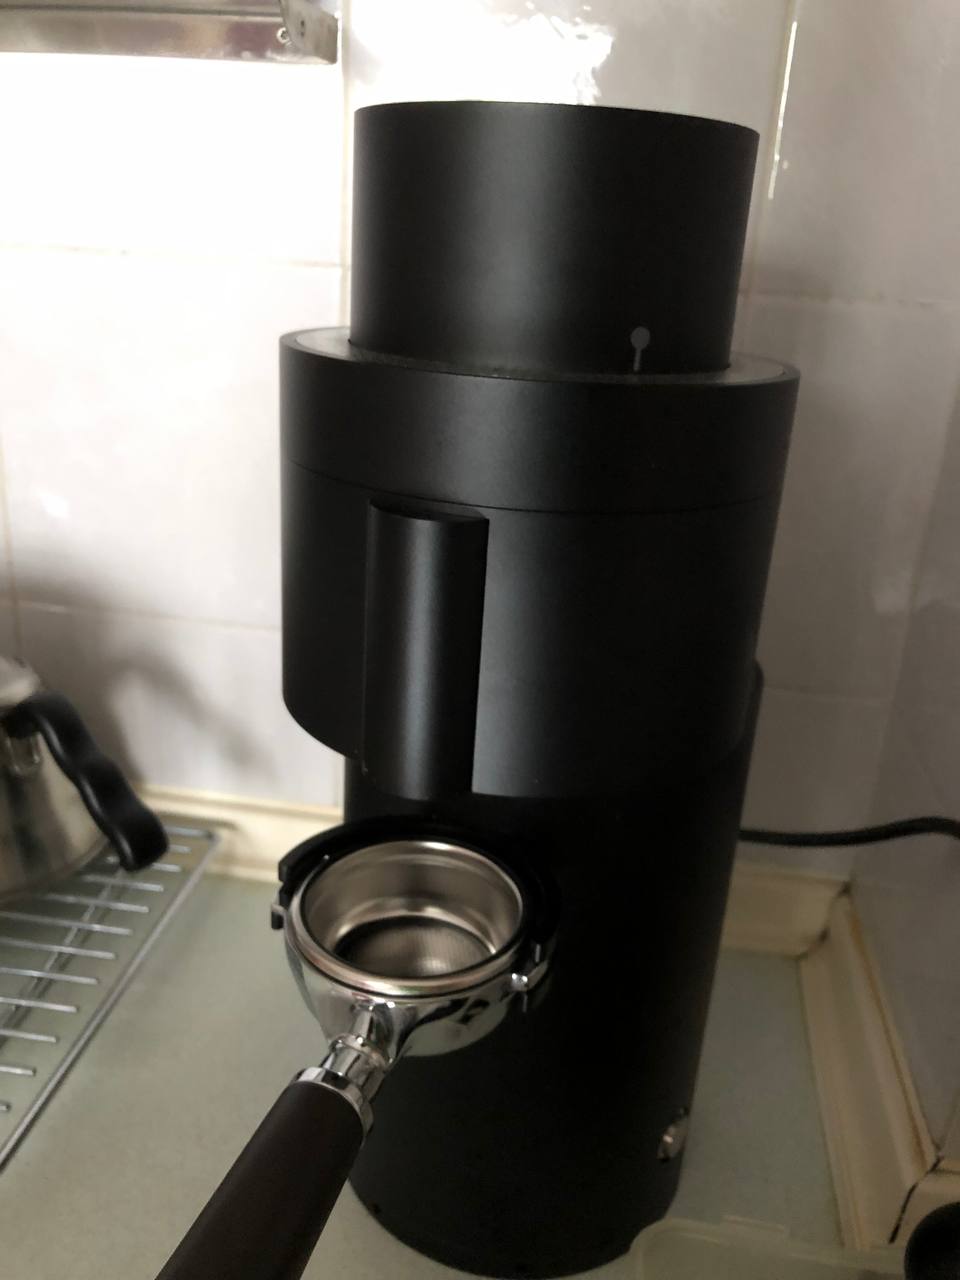 The P100 with an empty portafilter mounted onto the integrated portafilter fork. The 2 ears on each side of the portafilter are set between the prongs of the fork to hold them in place.